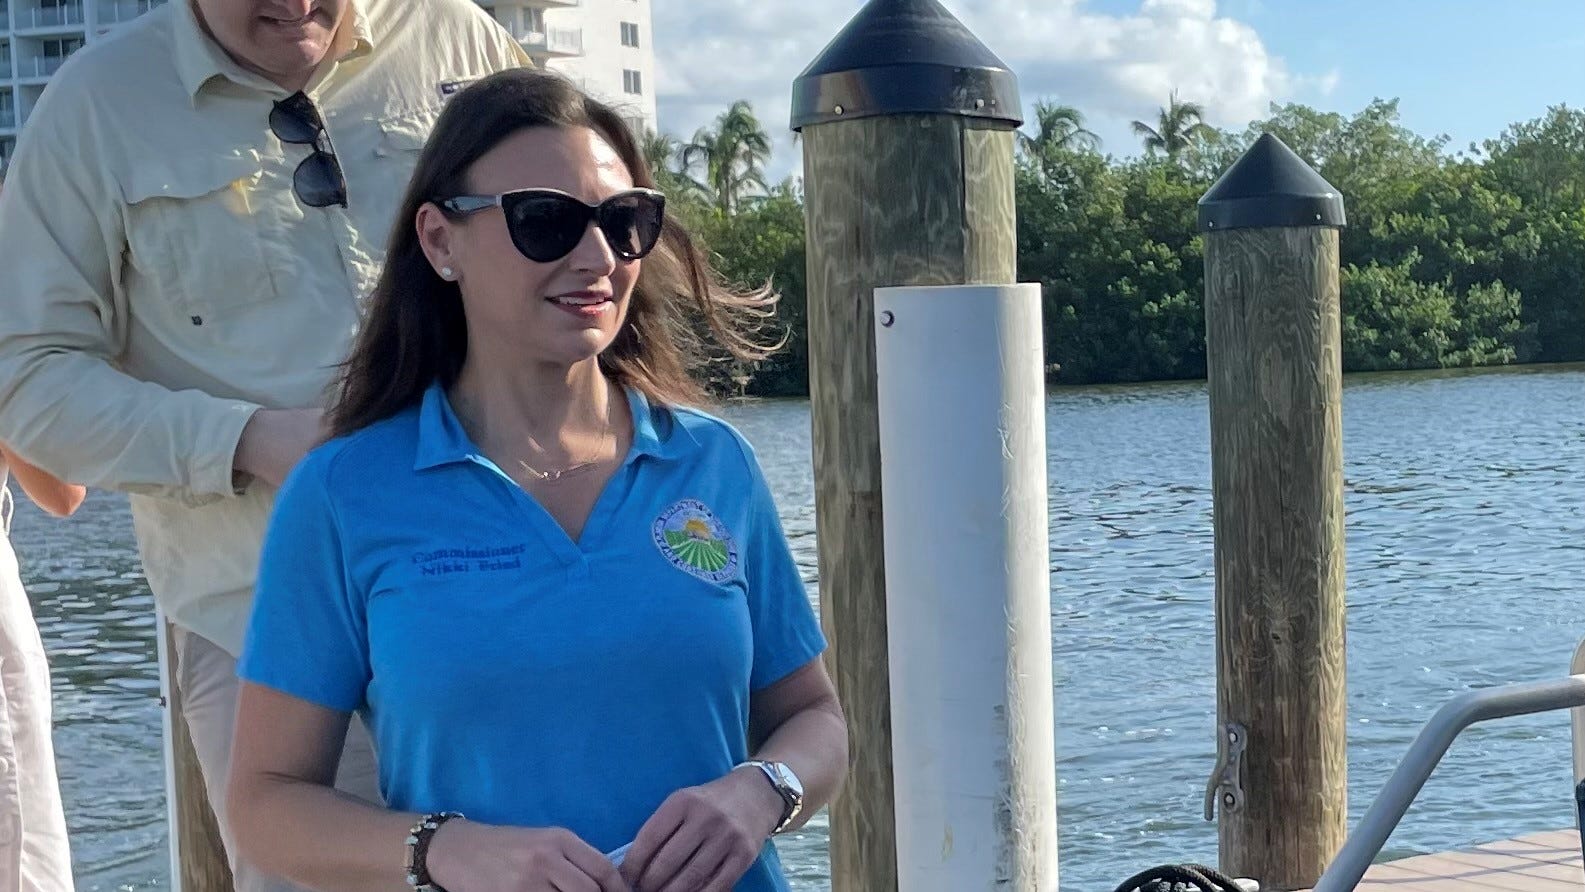 No more honor system: Florida ag commissioner promises inspections, reports to clean up water - Palm Beach Post